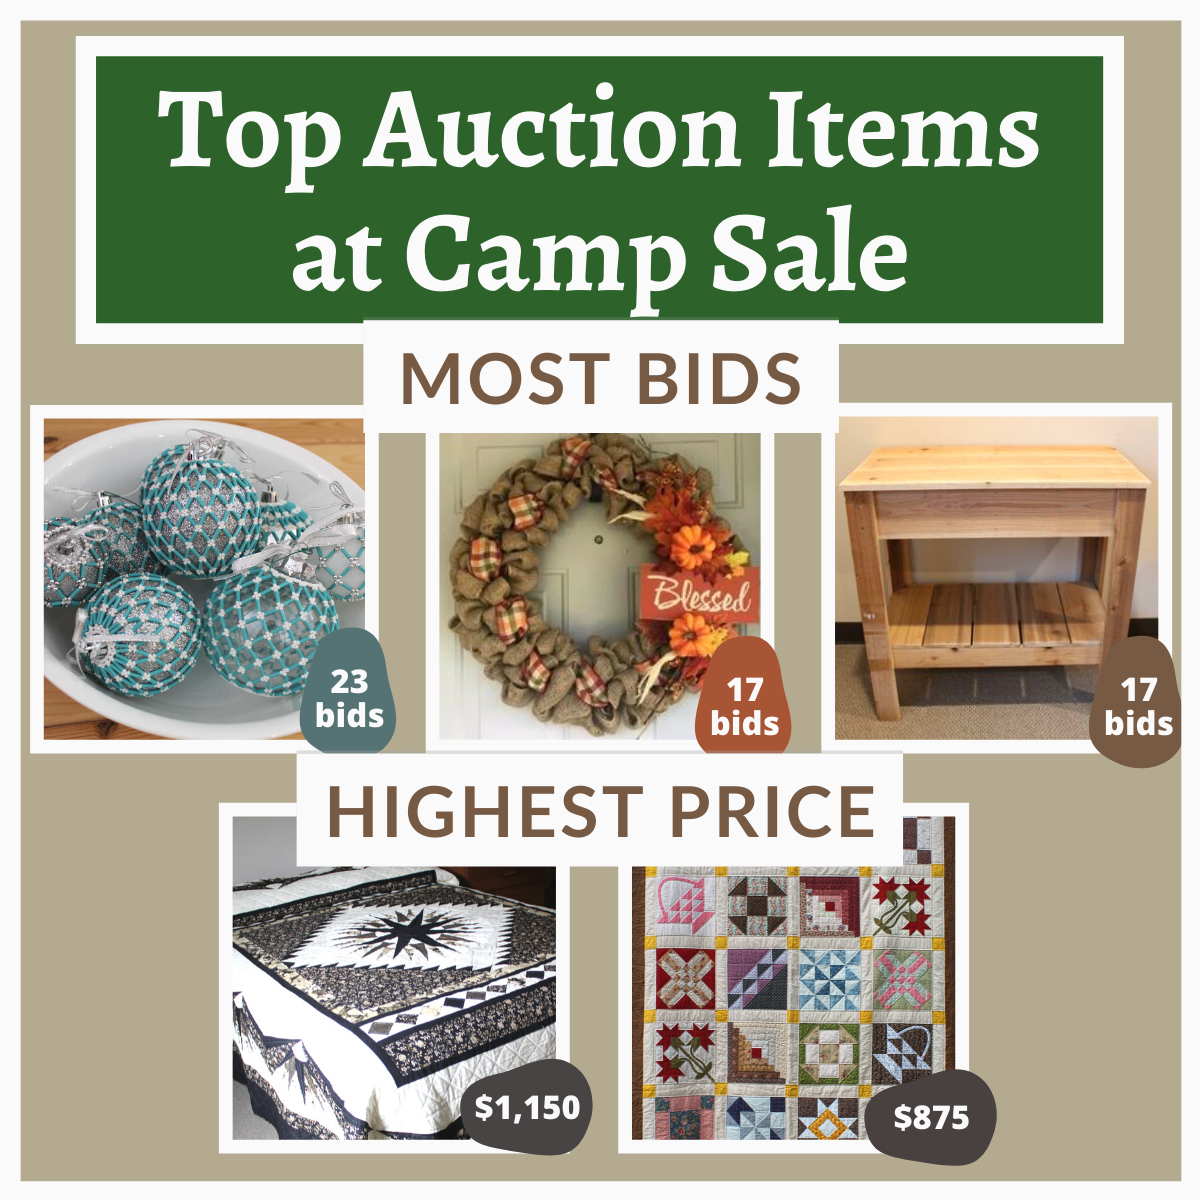 Top Auction Items at Camp Sale